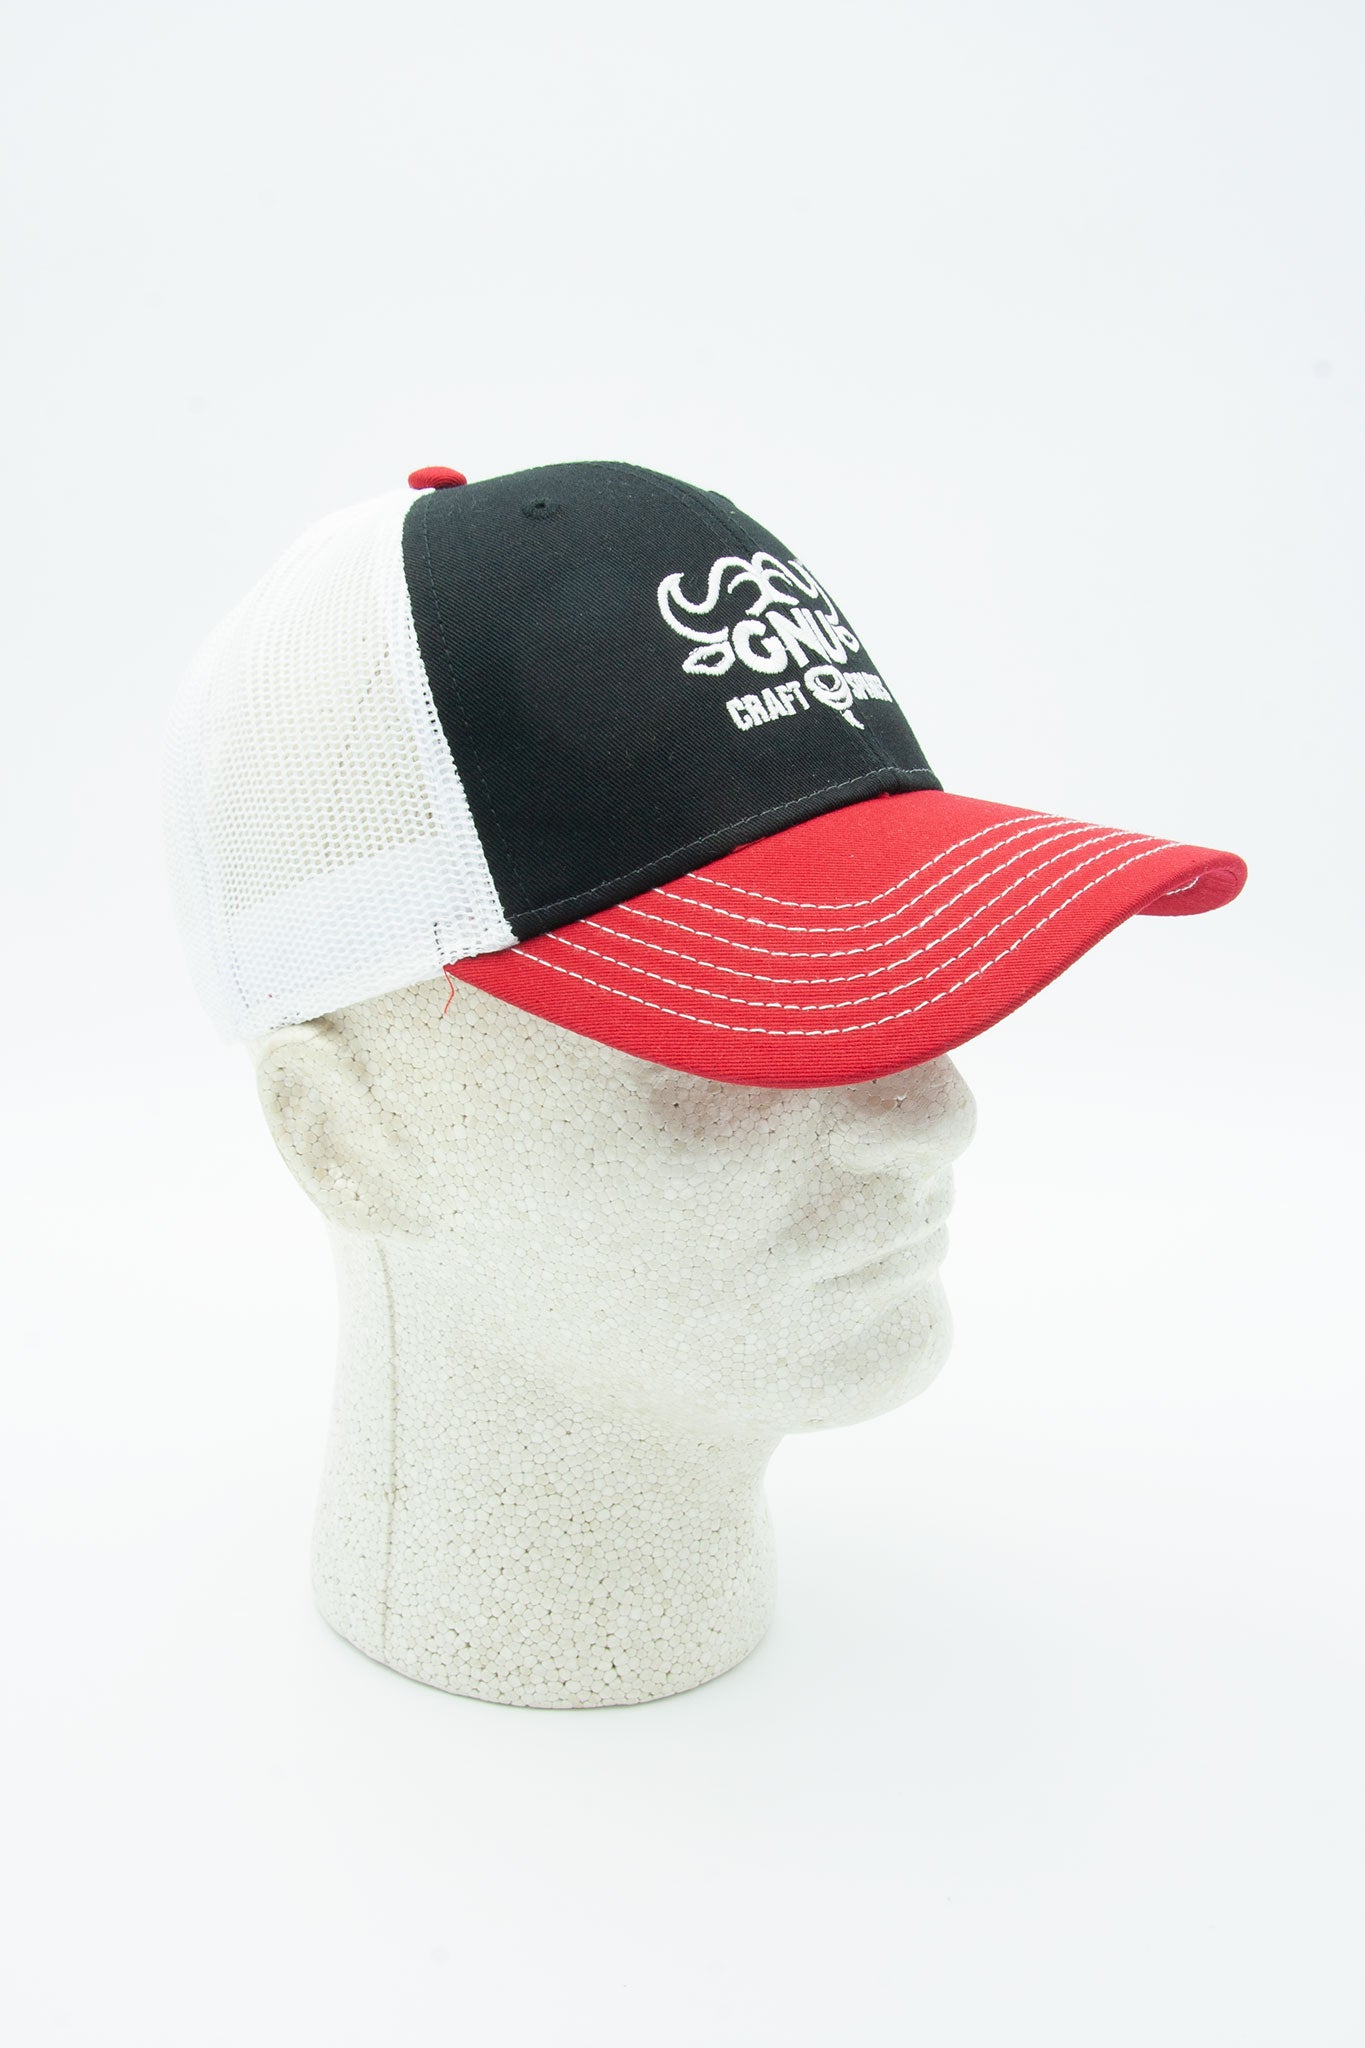 Classic SnapBack - Red